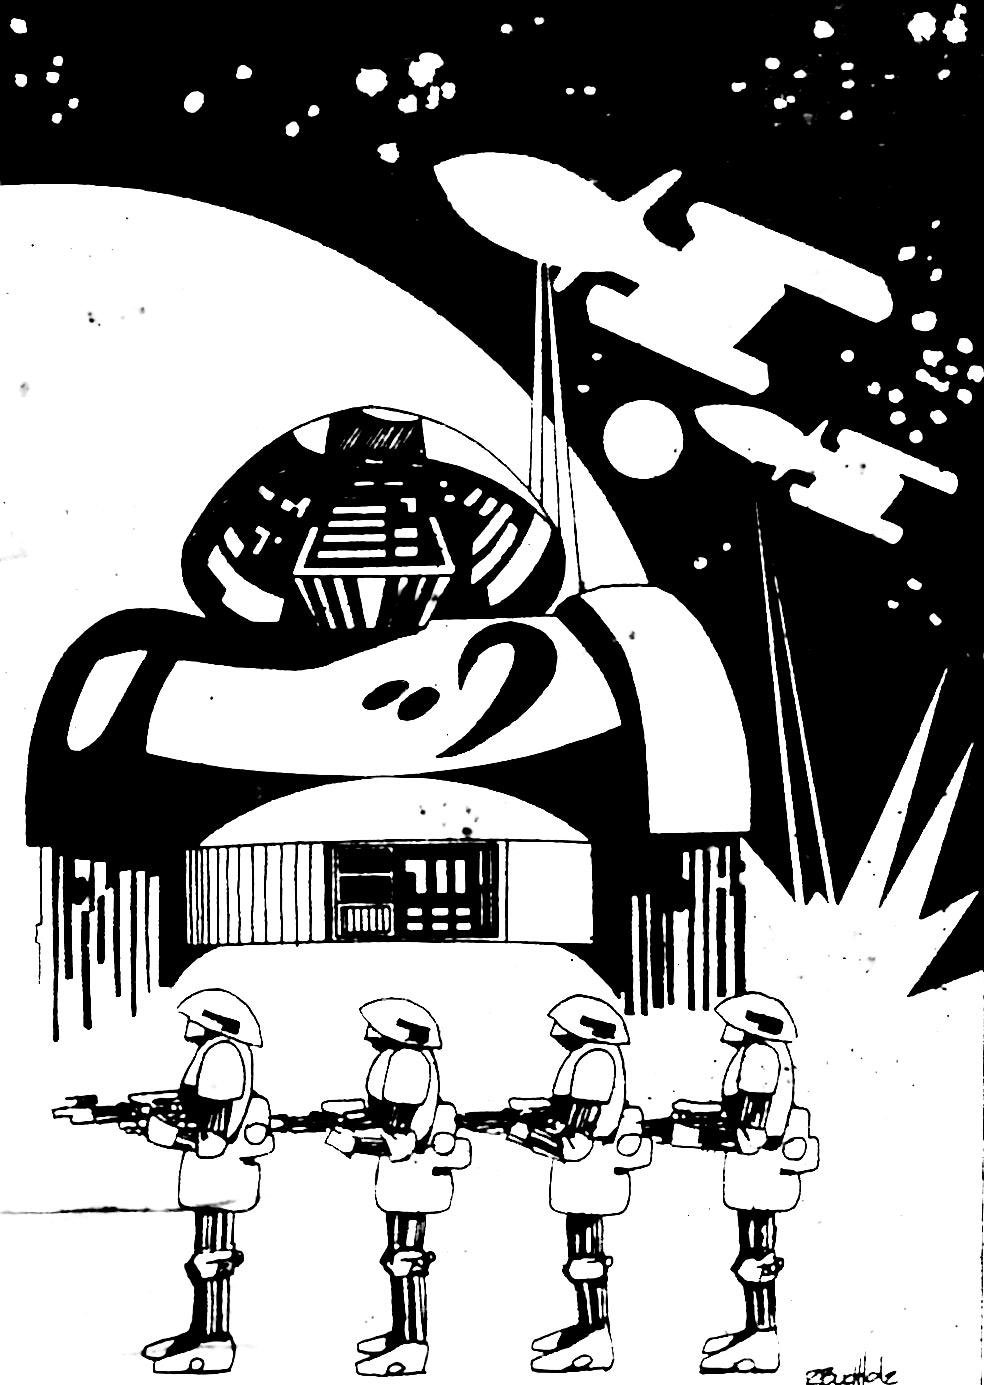  Retro black ink sketch of cyborg soldiers with starships attacking a planet in the background. By Roger Buchholz.  